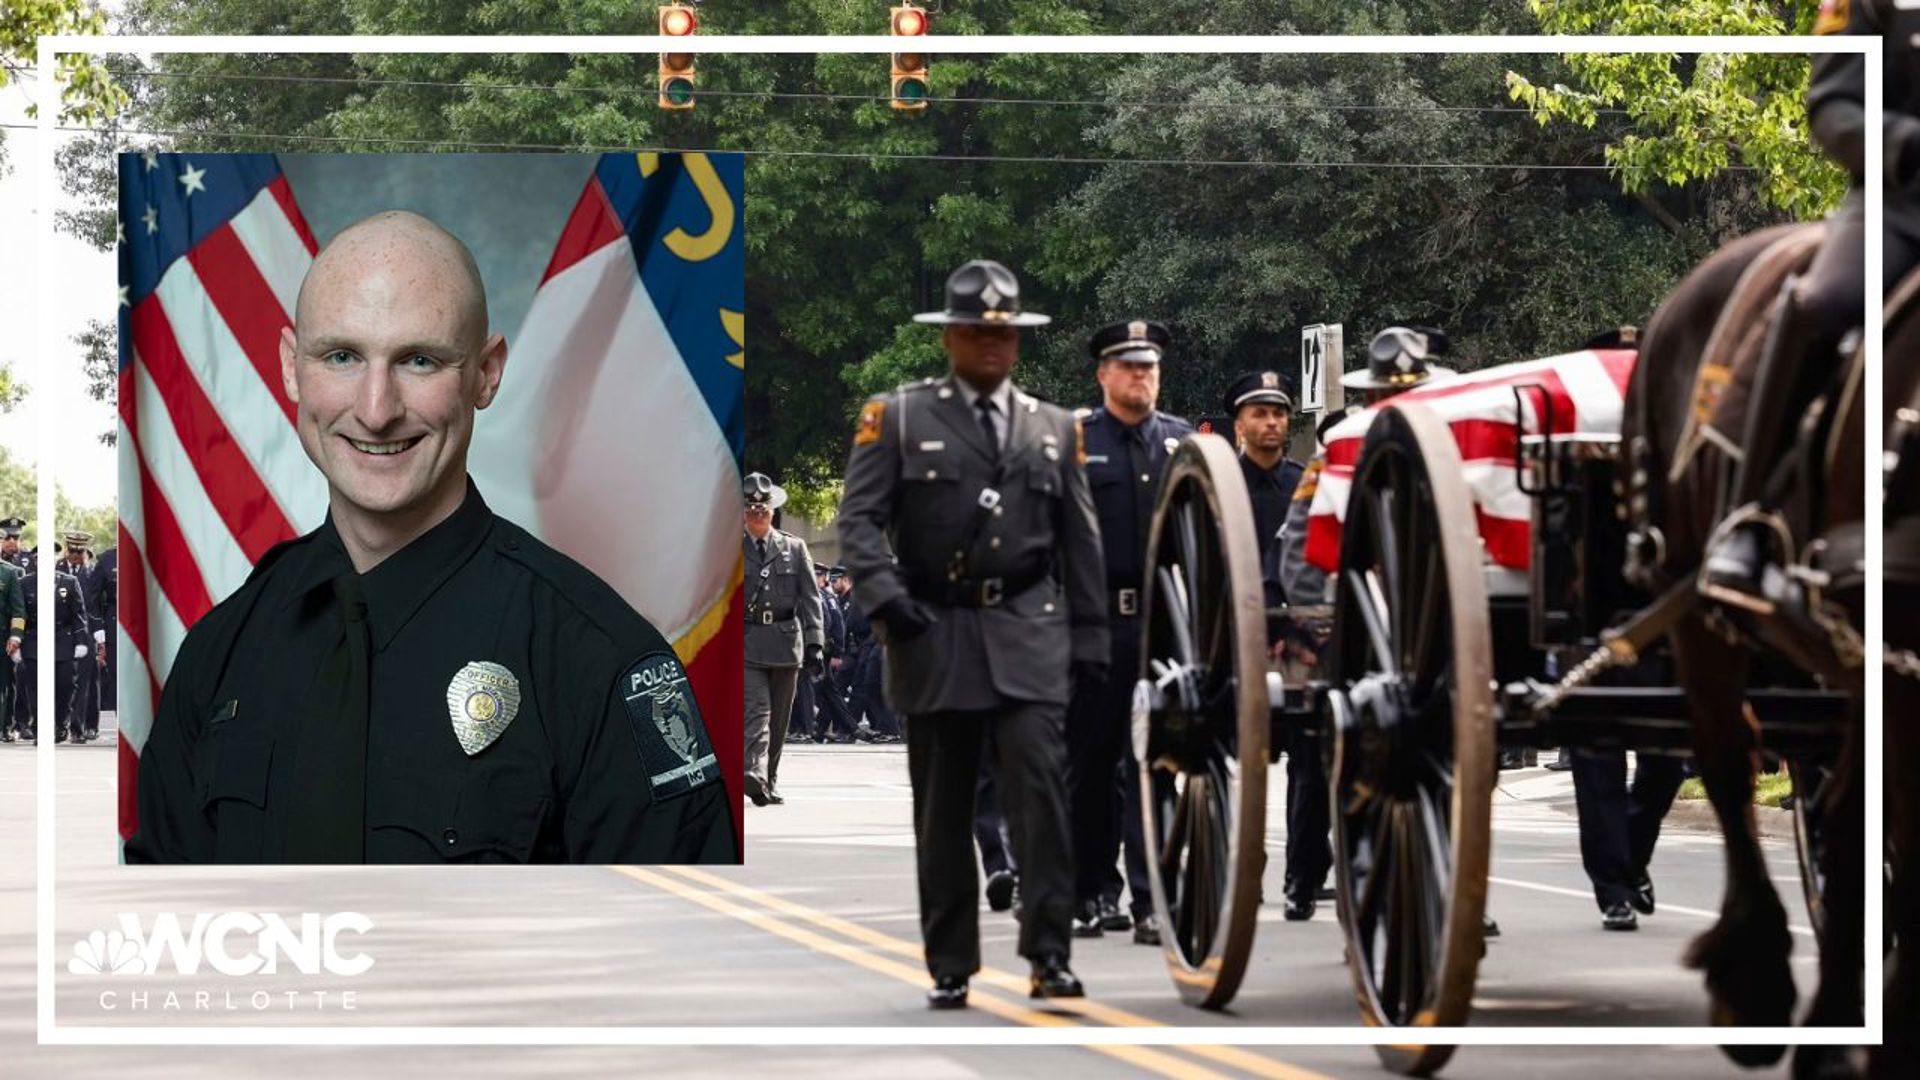 The Charlotte-Mecklenburg Police Department will honor four officers killed in the line of duty, adding Joshua Eyer's name to the fallen officer memorial in Uptown.